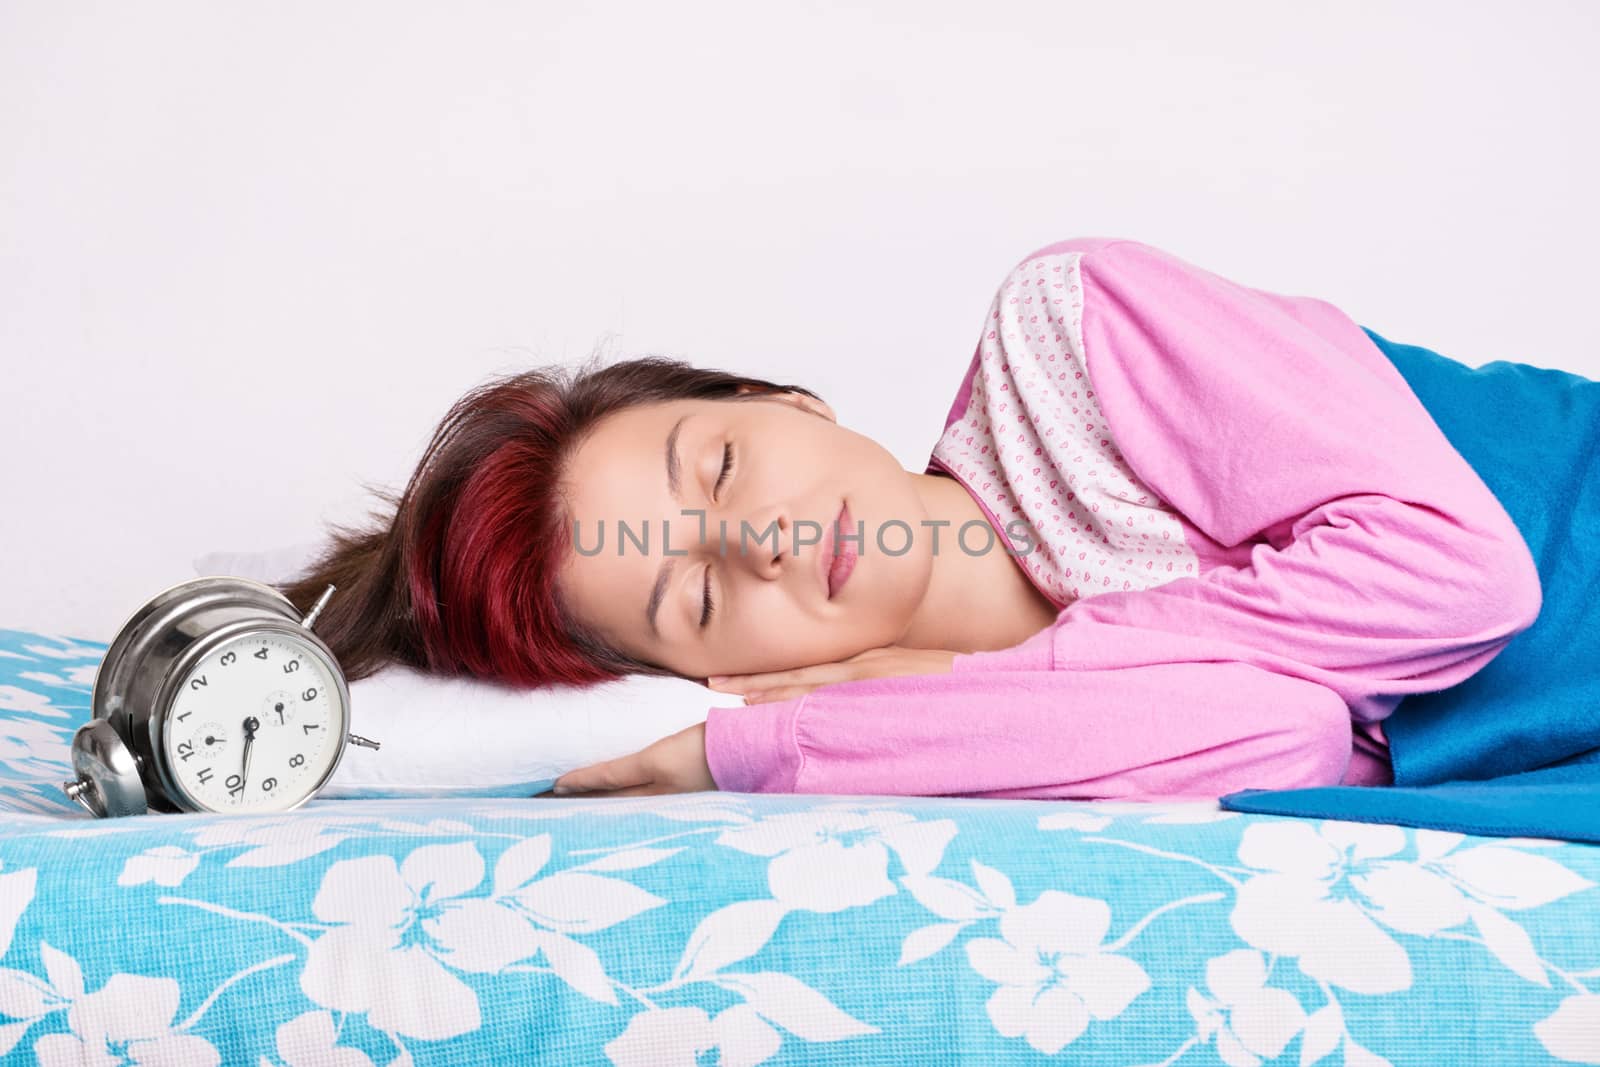 Beautiful young girl in pink pajamas calmly sleeping in her bed next to an old fashioned alarm clock. Healthy sleeping concept.